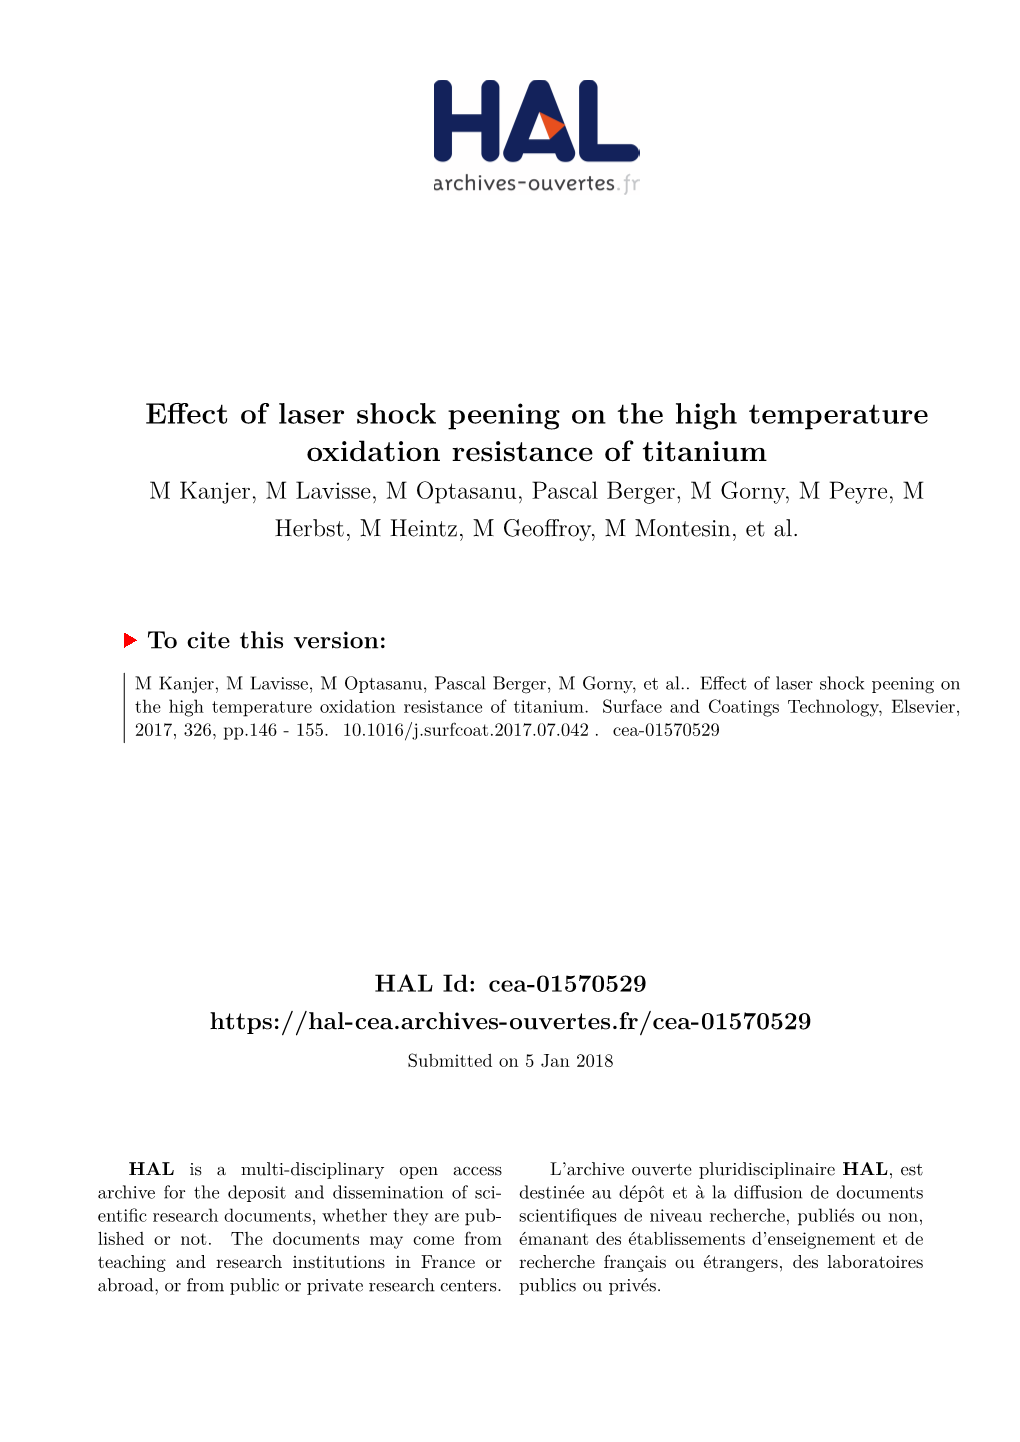 Effect of Laser Shock Peening on the High Temperature Oxidation